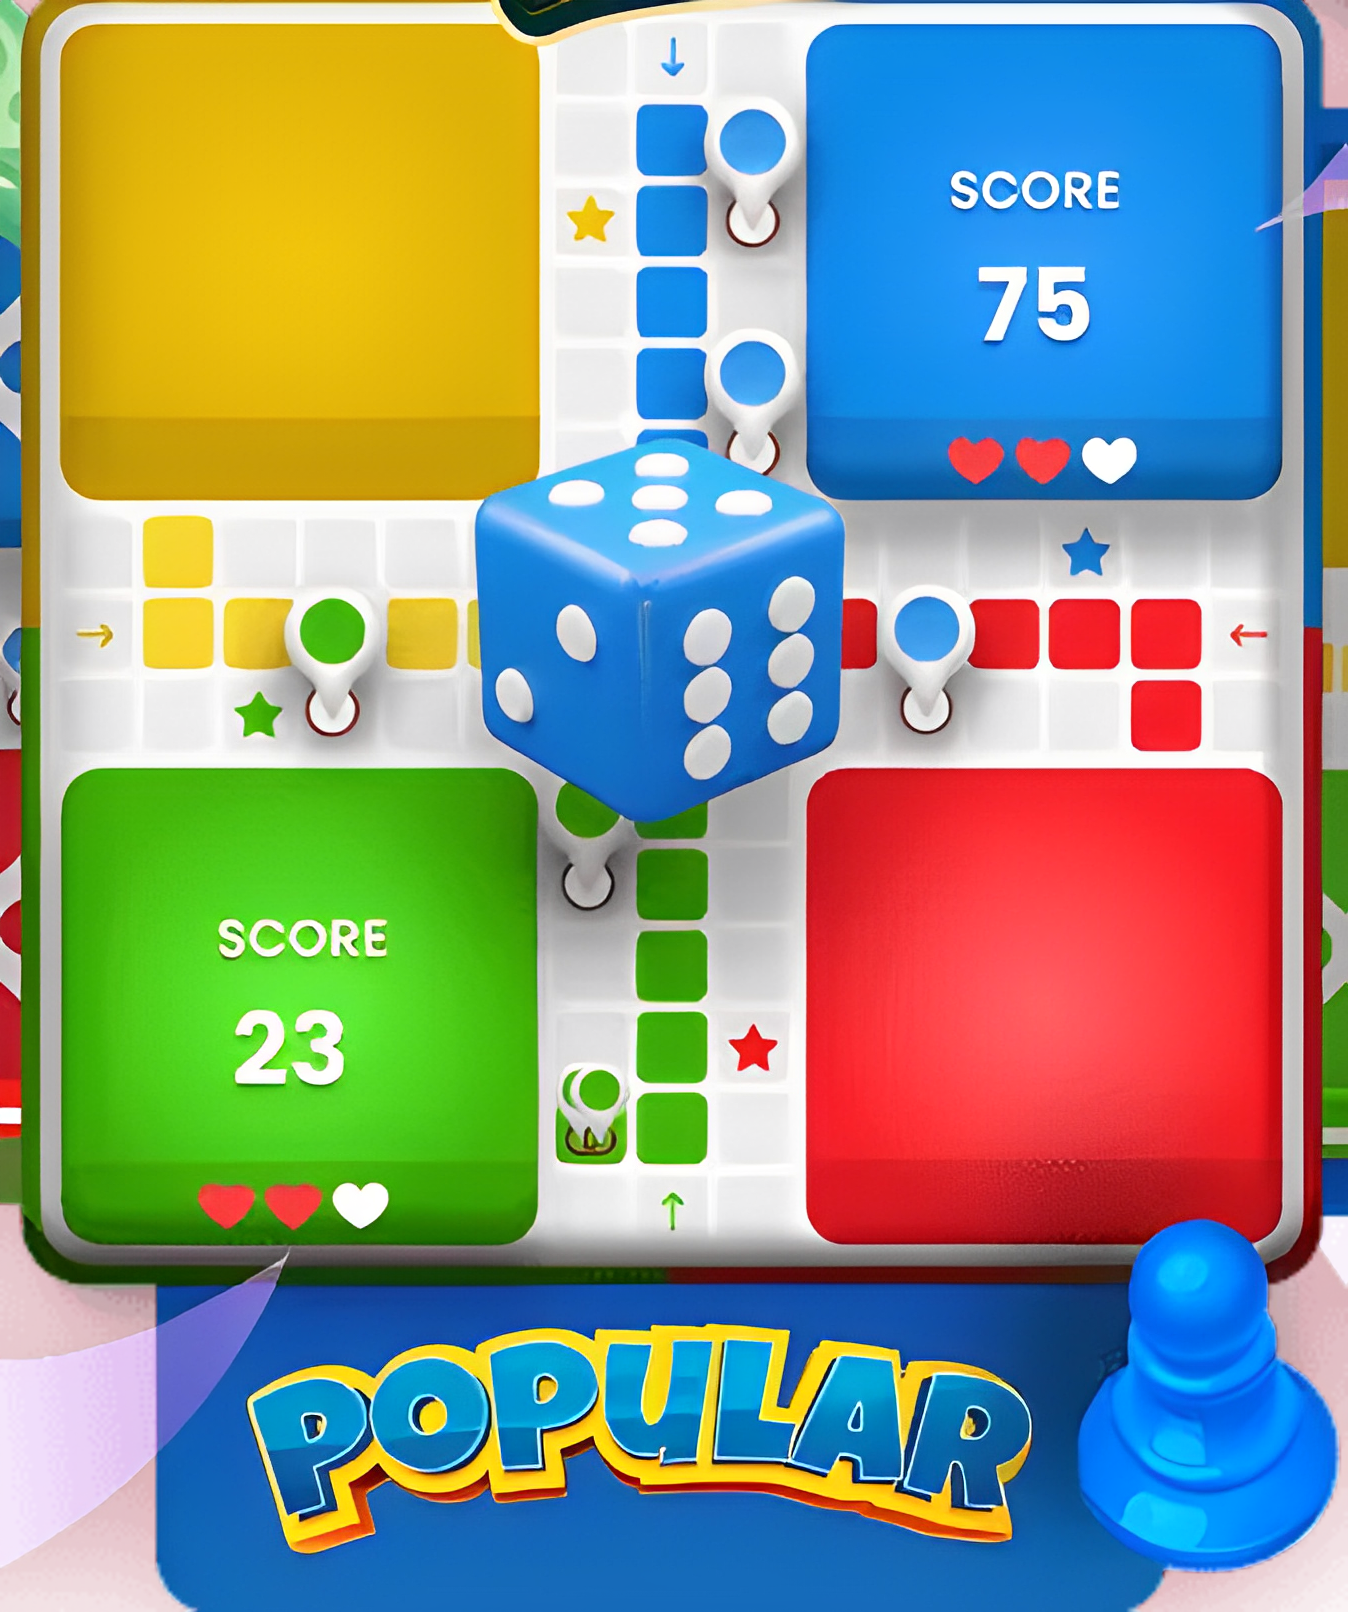 PLAY LUDO ONLINE & WIN REAL MONEY ON LUDO LIVE